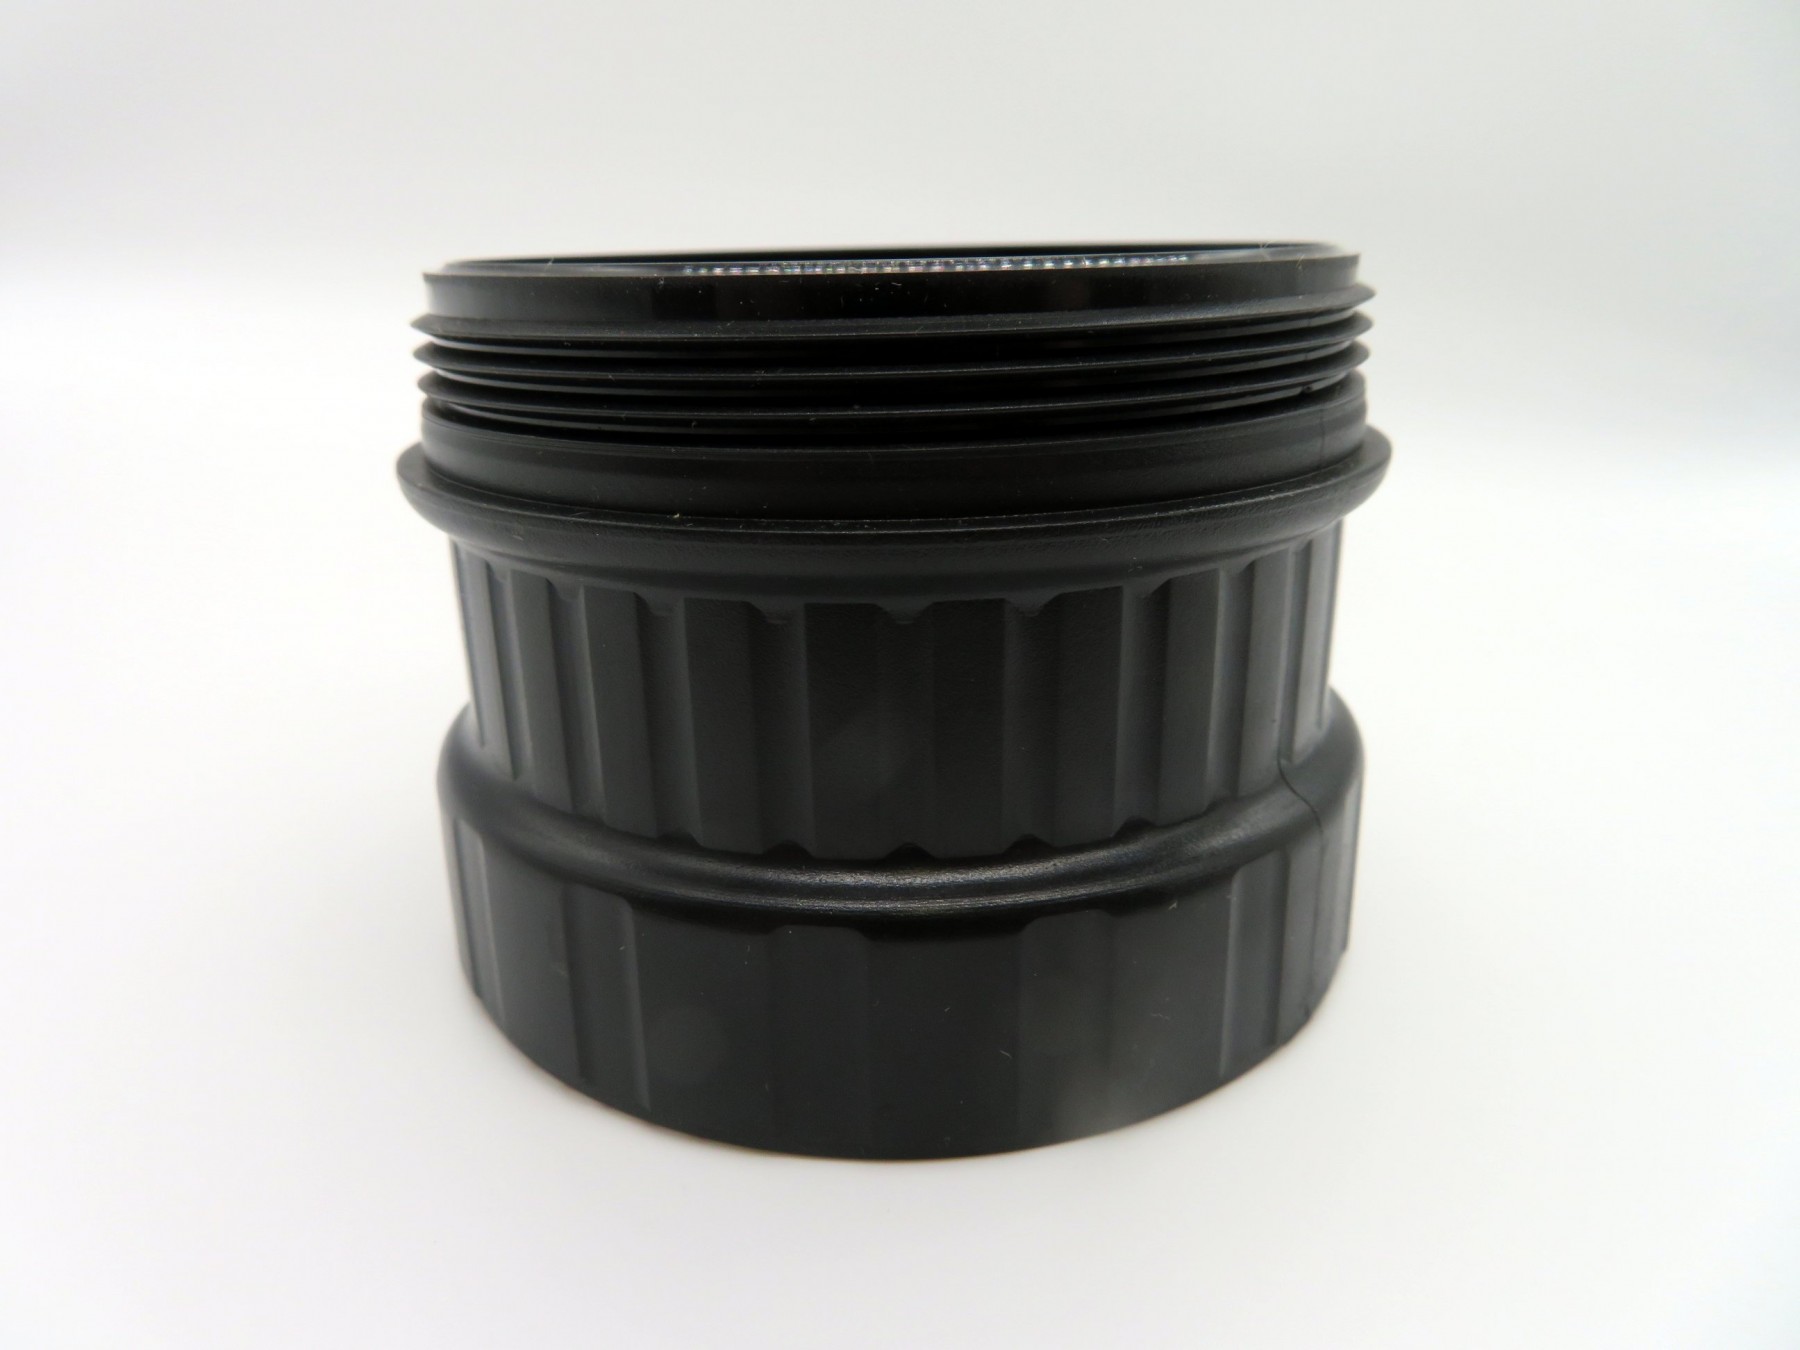 Genuine DiCAPac spare part spare-part-dicapac-wp-610-wp-h10-extension-for-lens-tube-32